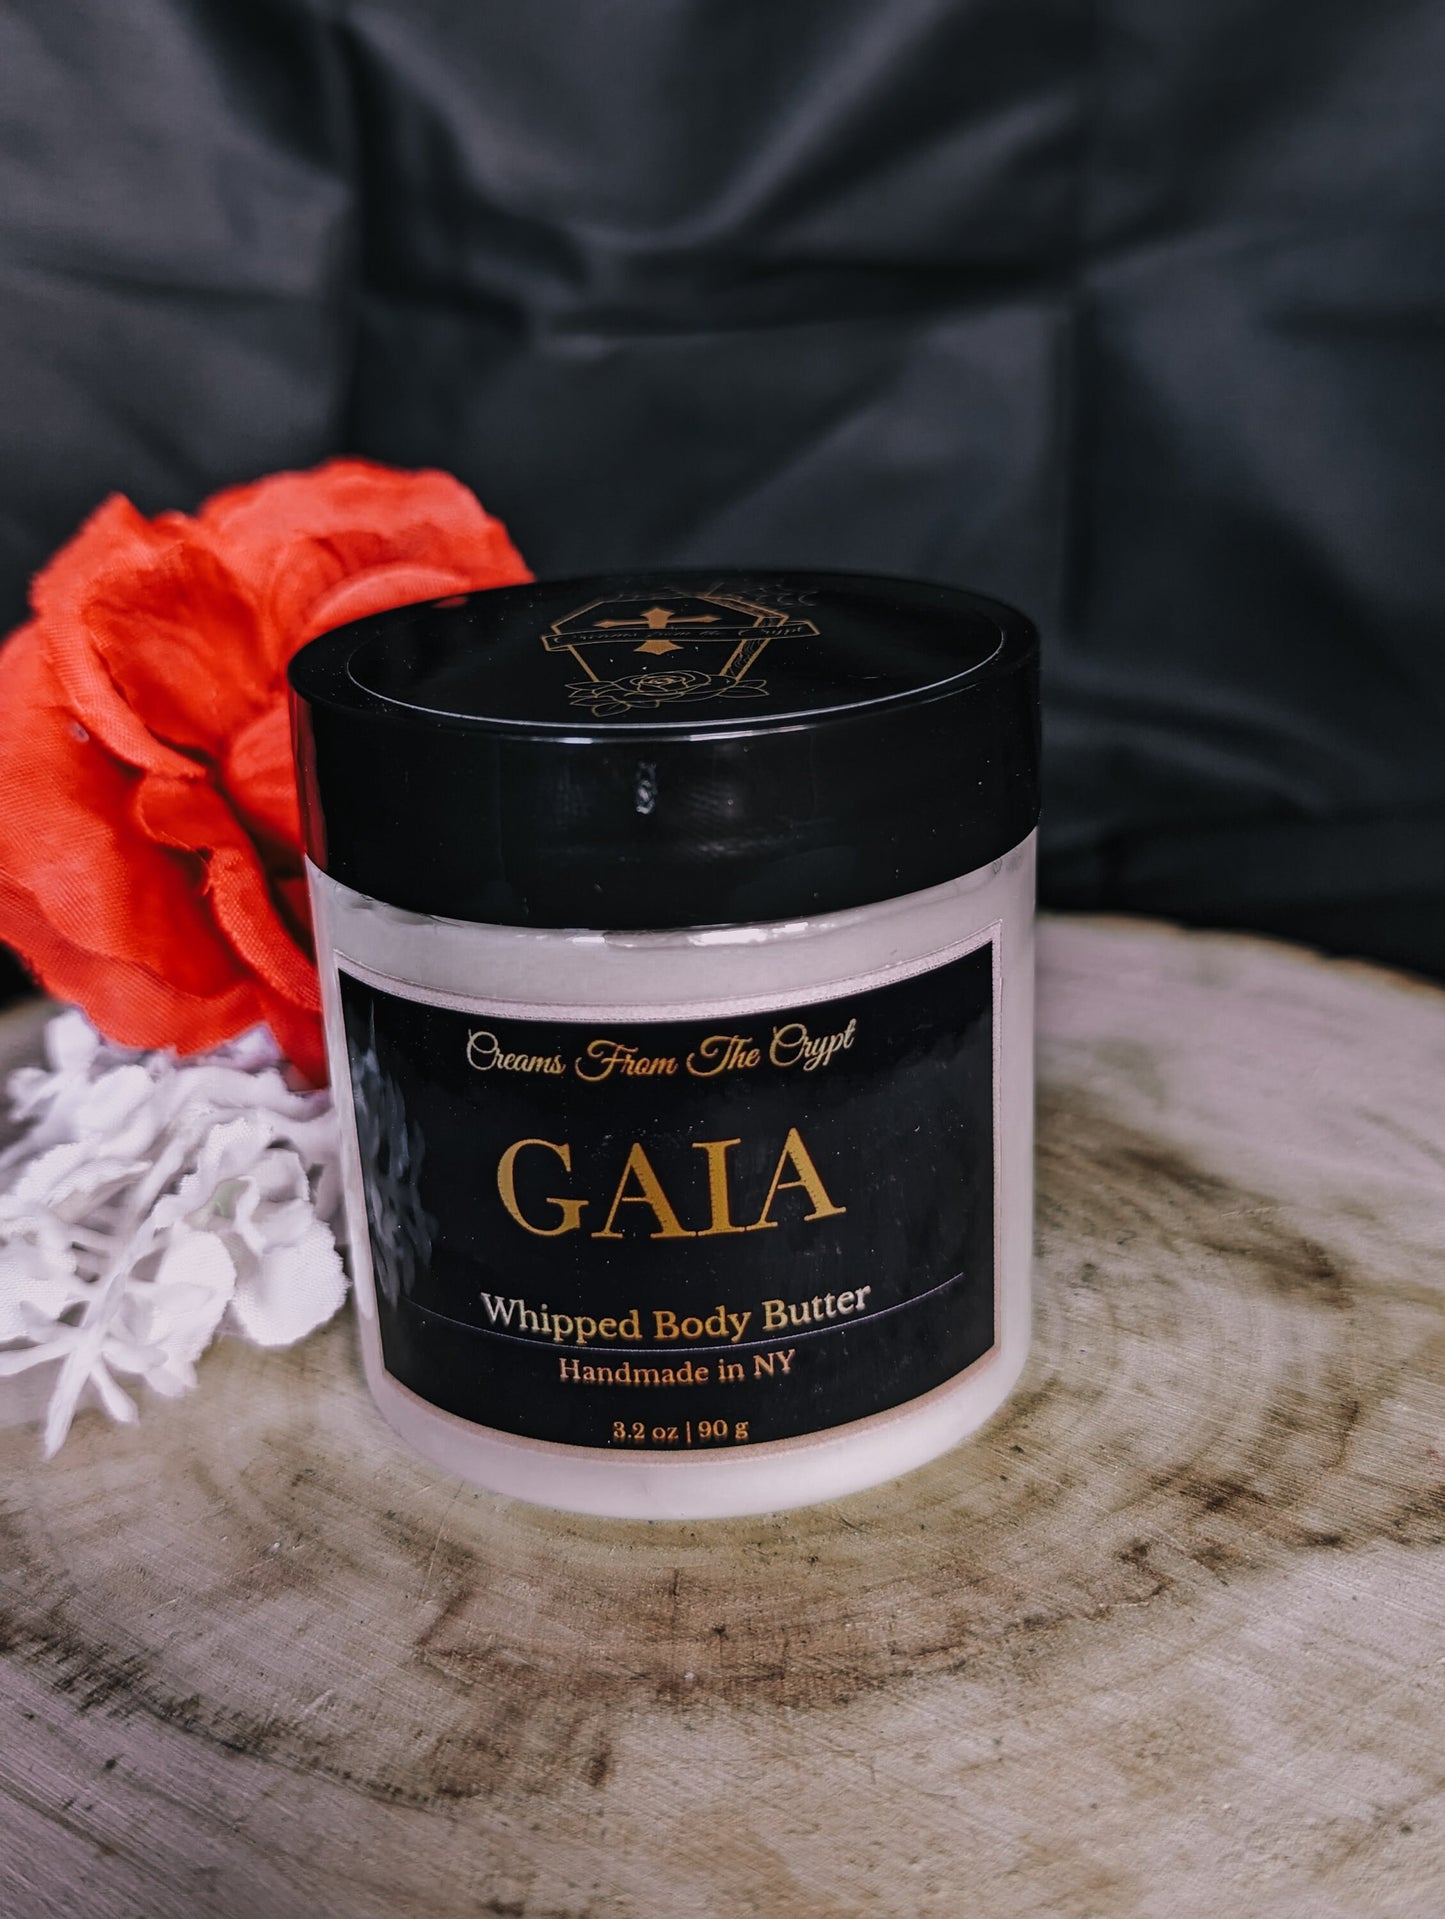 GAIA - Cherry almond scented vegan whipped body butter, shea, mango butter, moisturizer, gothic skincare, fruity fragrance, nutty